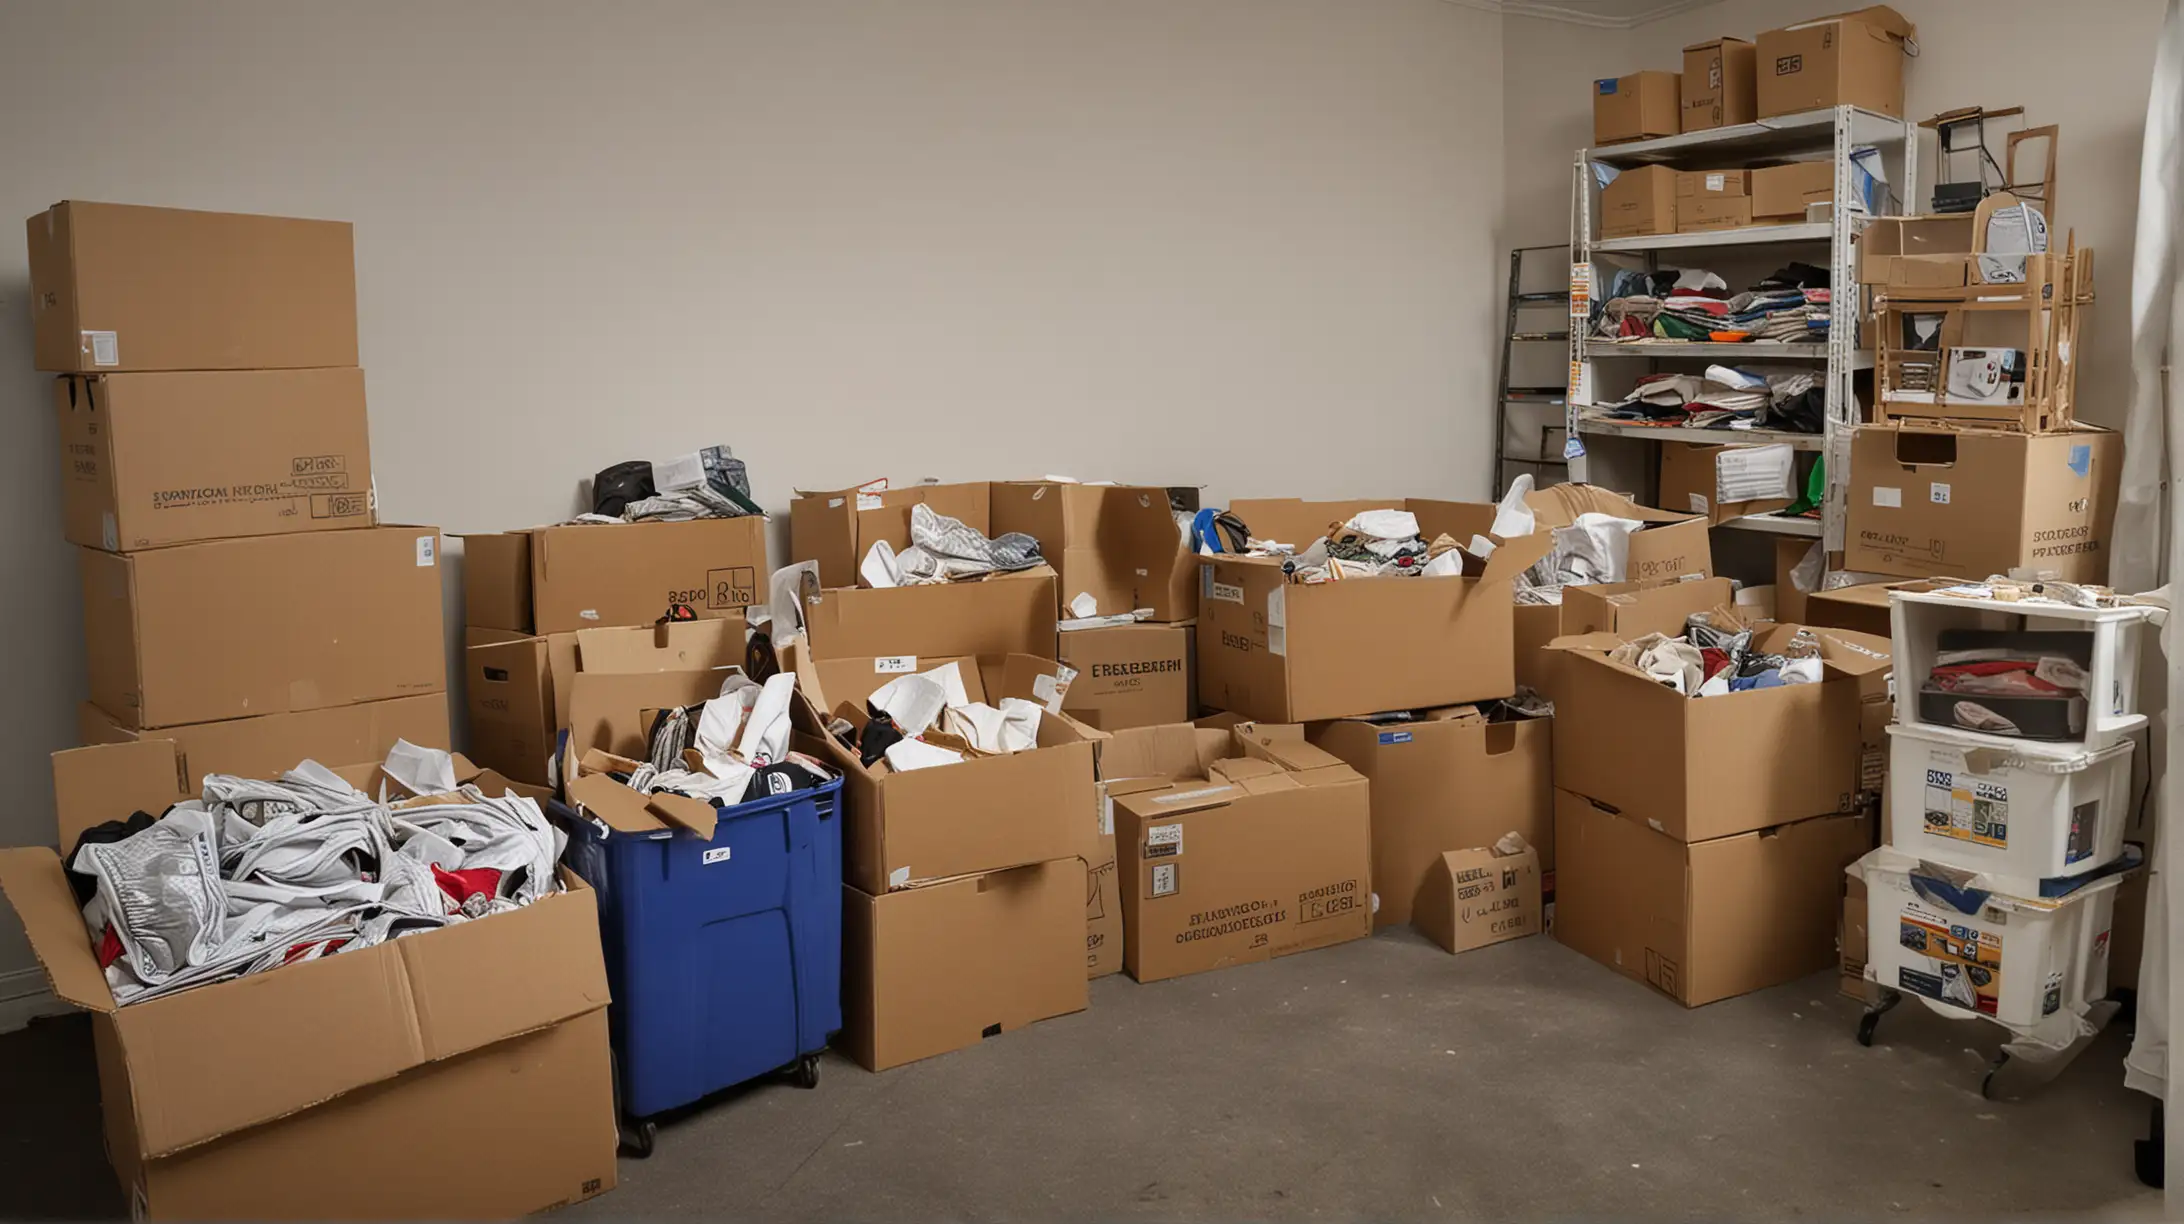 Create a high-quality photograph depicting the organized sorting process during a property turnover. The image should capture a variety of items such as furniture, electronics, and boxes, neatly sorted into different areas or bins labeled for recycling, donation, and disposal. The scene should be set inside a spacious room or garage of a residential property, emphasizing cleanliness and order. Include Route Runners Junk Removal team members actively engaging in the sorting process, wearing branded uniforms to convey professionalism. Use a DSLR camera with a 35mm lens to capture the entire scene in sharp detail, ensuring that the lighting highlights the cleanliness and organization of the space.

Camera and Lens Settings:

Camera Type: DSLR
Lens: 35mm lens, ideal for capturing comprehensive indoor scenes without losing focus on the details
Aperture: f/5.6, to ensure both the sorted items and the team members are in sharp focus, capturing the texture and condition of the items
Shutter Speed: 1/100 sec, suitable for indoor lighting, providing clarity without motion blur
ISO: 400, to compensate for potentially varied lighting conditions within the room and ensure the image remains bright and clear
This setup is designed to visually communicate the meticulous and responsible approach taken by Route Runners Junk Removal during the sorting phase of a property turnover, showcasing how different items are handled to minimize waste and support sustainability.